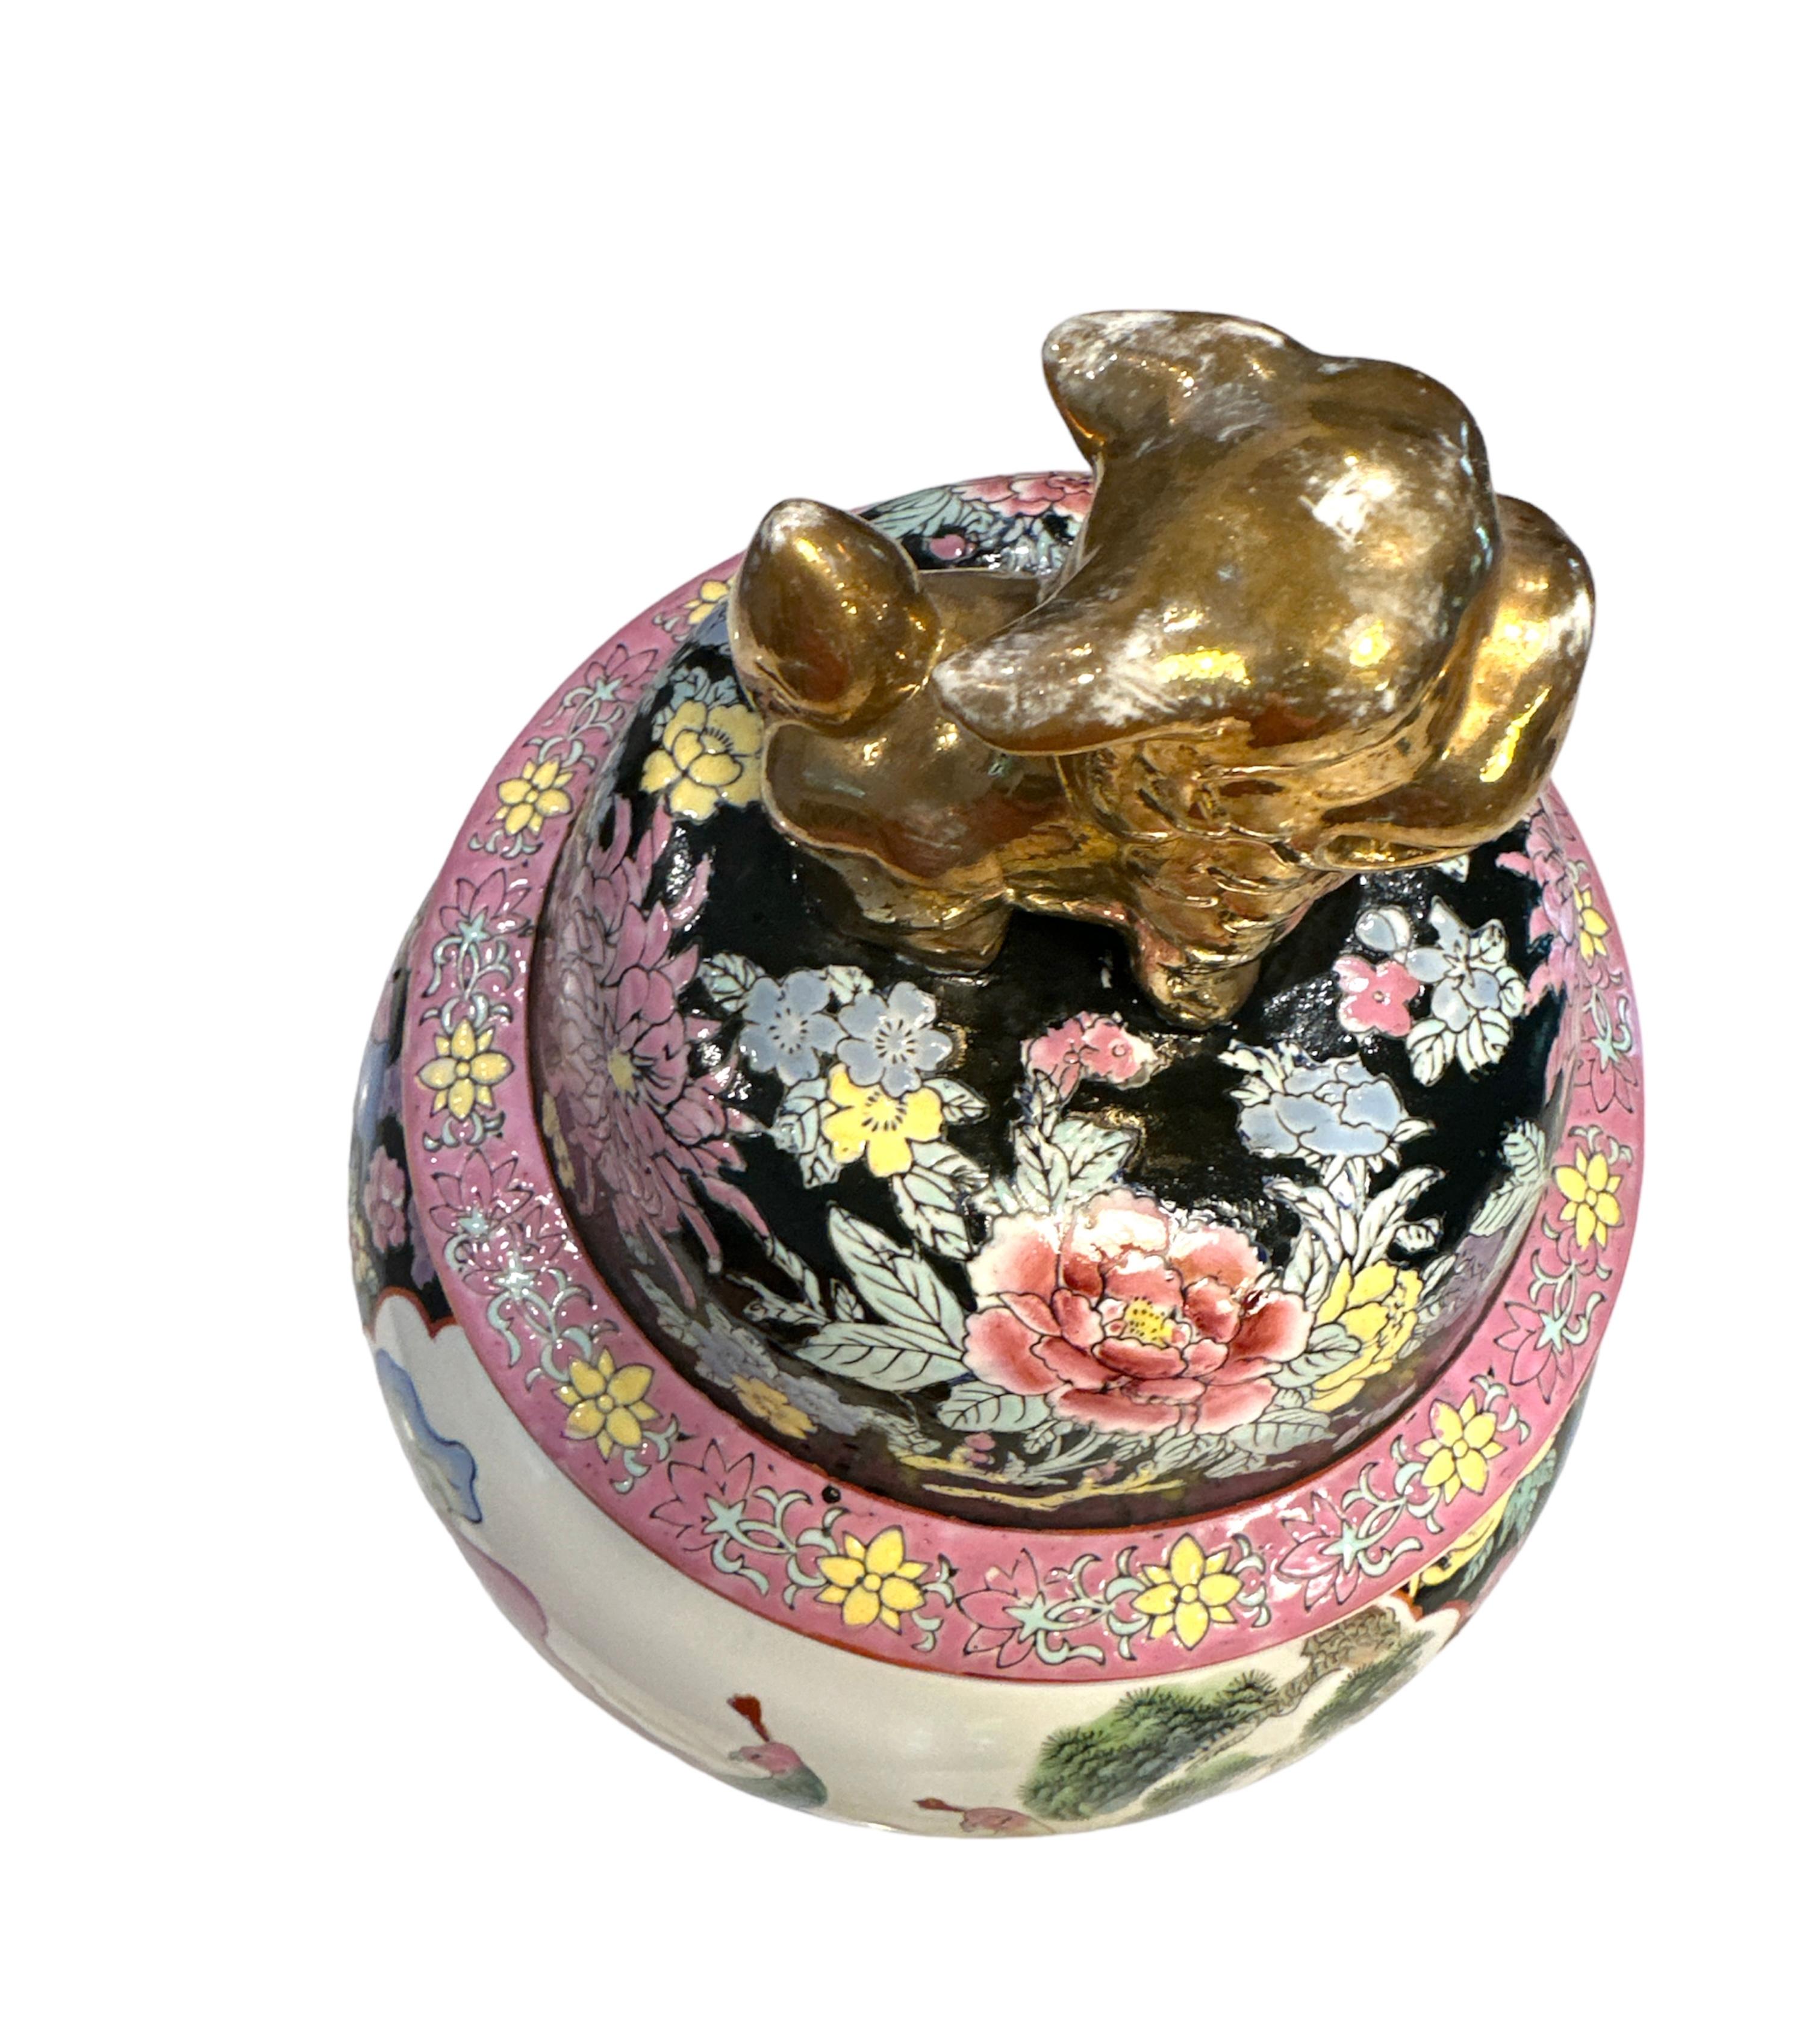 Antique Kutani Maison ginger jar.This is quite the statement piece, it is delicatly painted with beautiful pastel colors of peacocks, floral arrangement surround the figures, the colors are soft yet vivid and the Foo dog on the lid is holding a